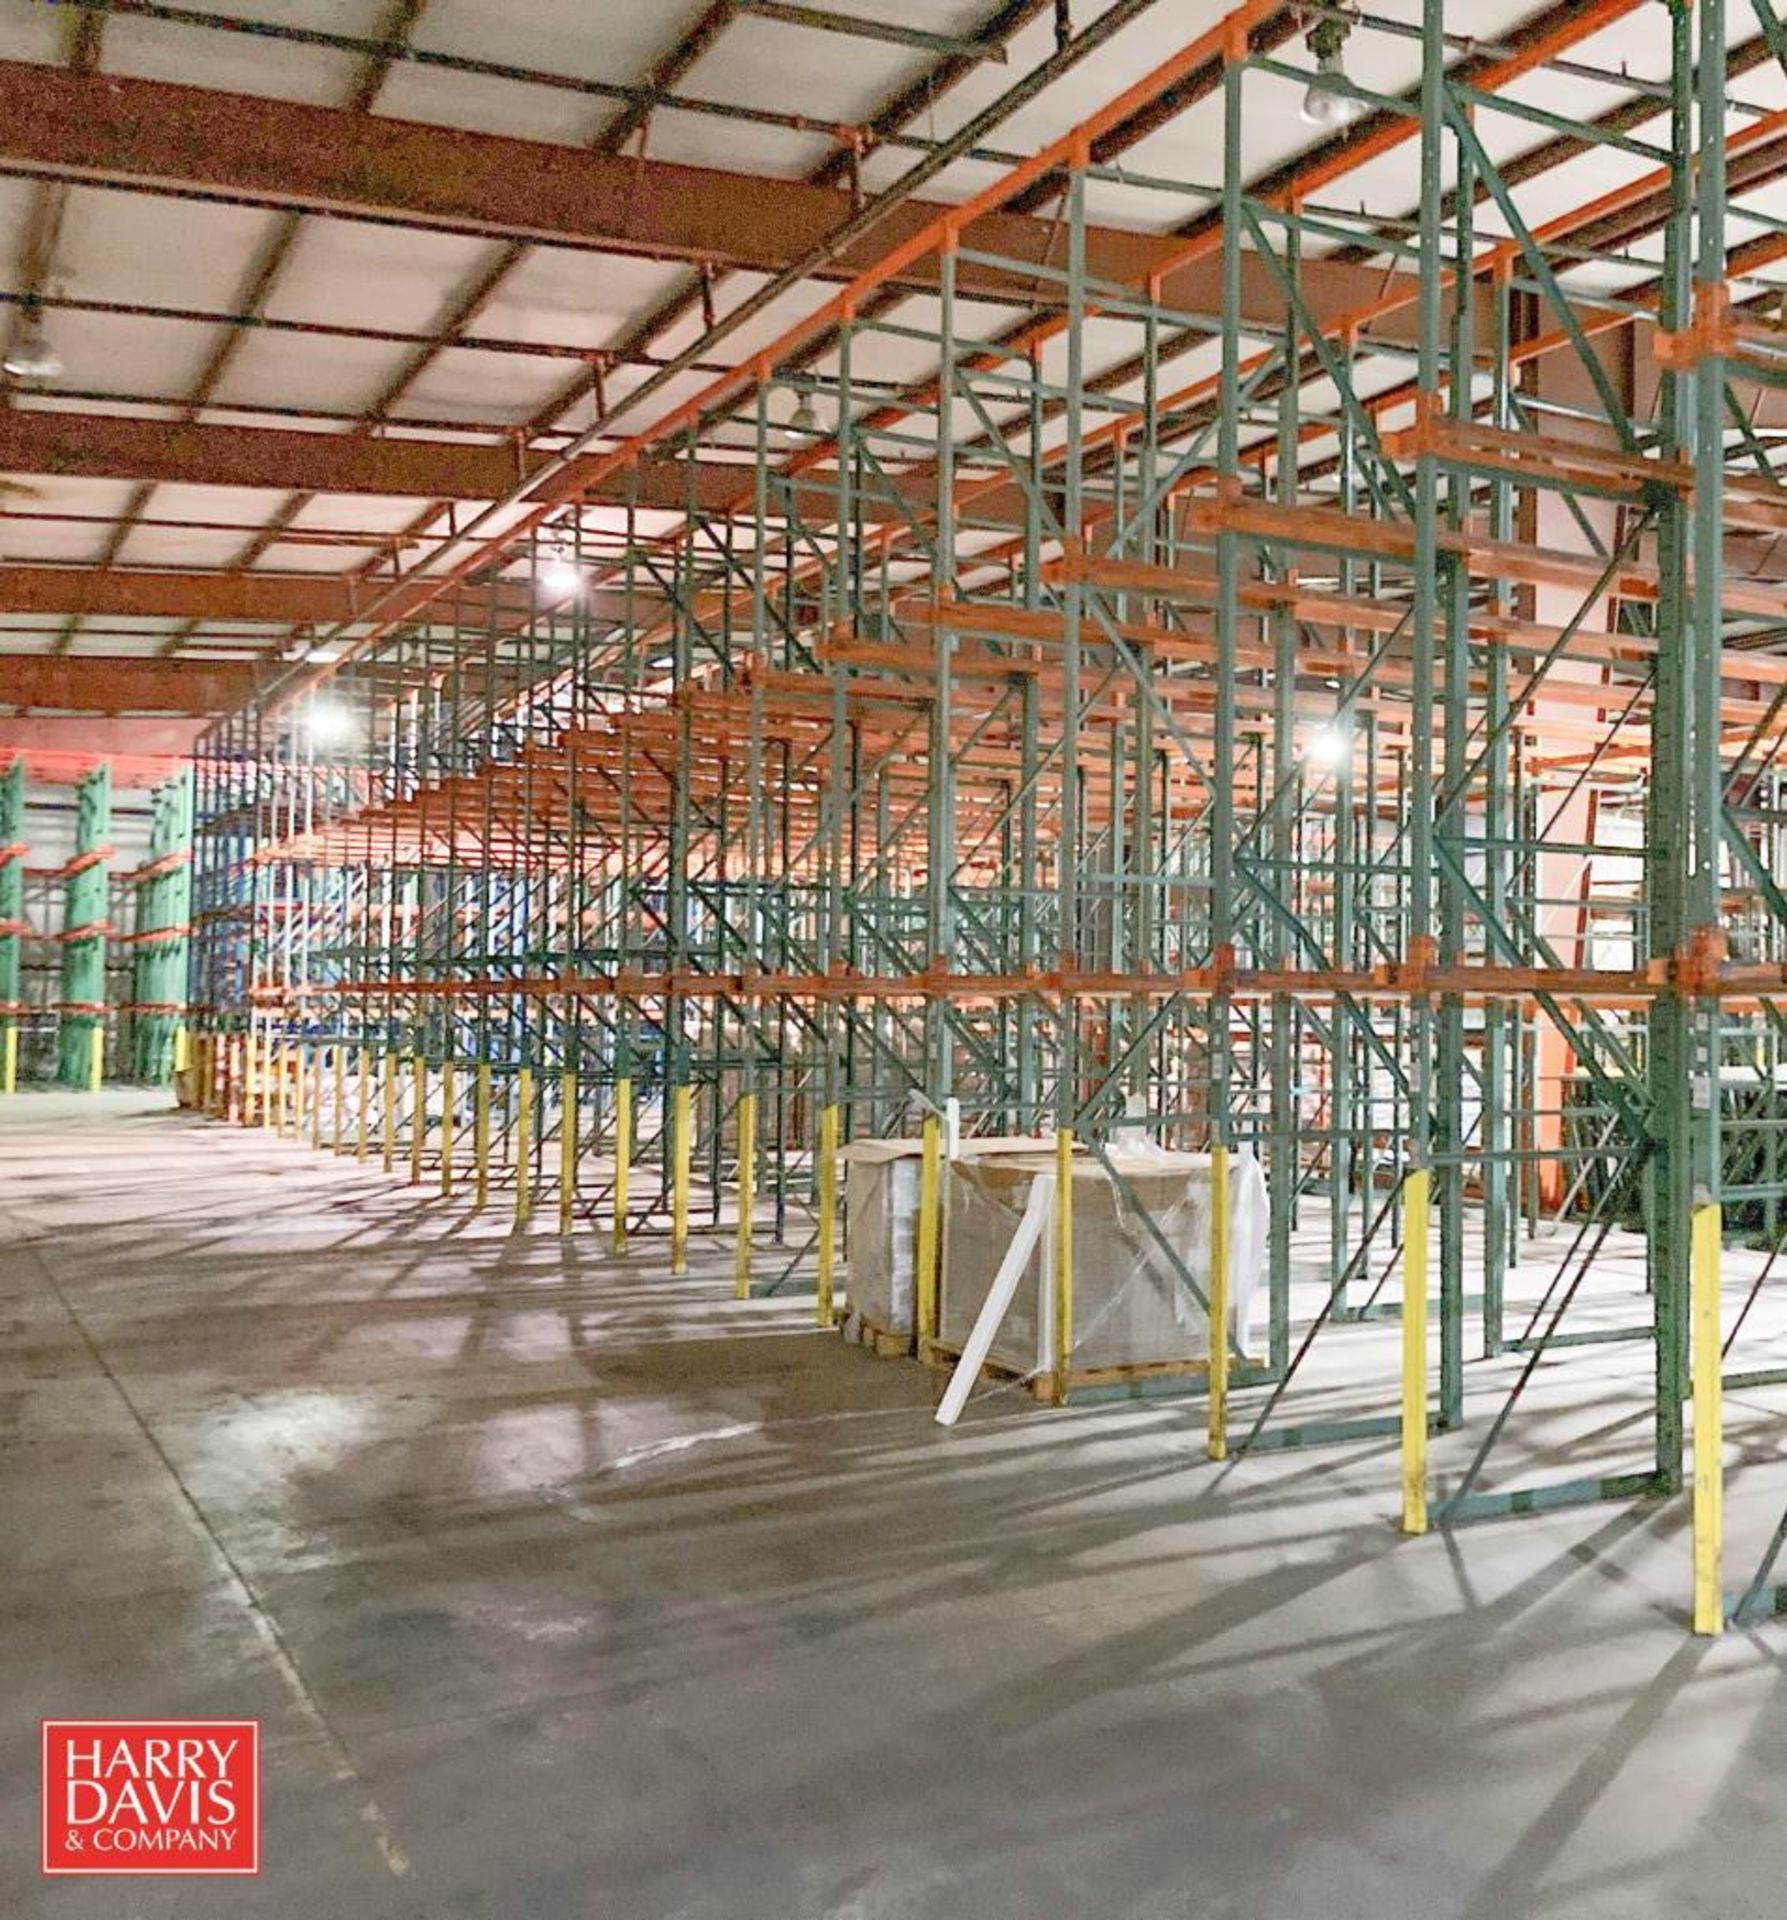 Bays, Drive-In Pallet Racking, 4 High - 24 Pallet Spaces Each (Location: Little Rock, AR) - Image 2 of 2